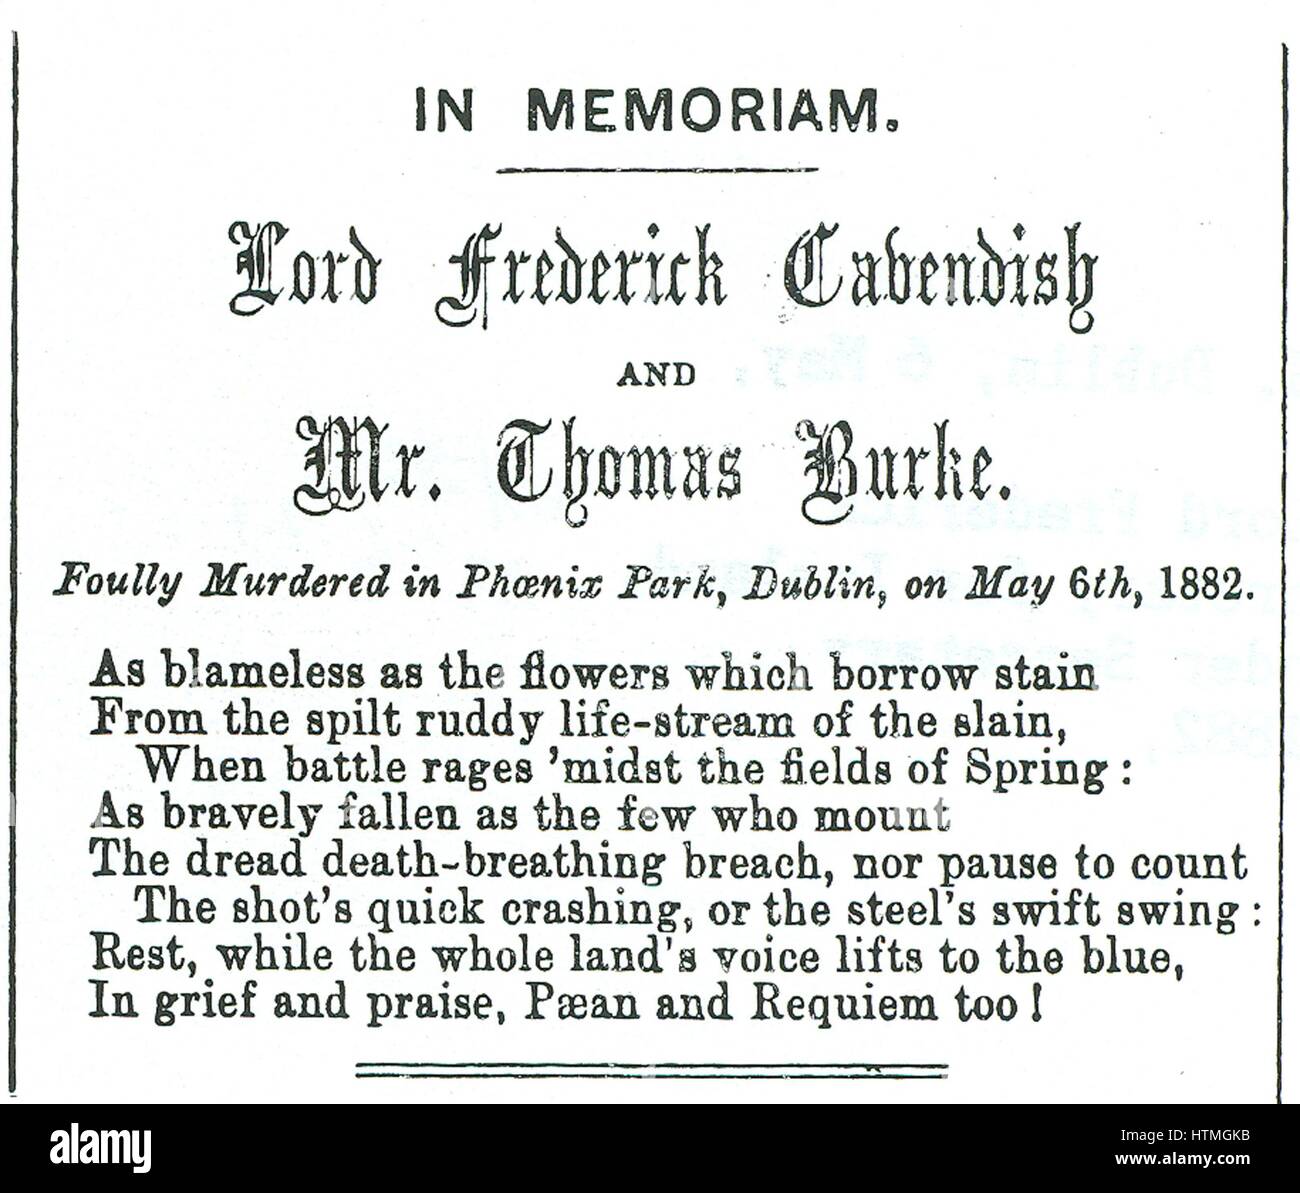 Phoenix Park Murders, Dublin, 6 May 1882. Memorial notice to Lord Frederick Cavendish, Chief Secretary for Ireland, and Thomas Burke, Under Secretary. From 'Punch, 20 May 1882. Stock Photo